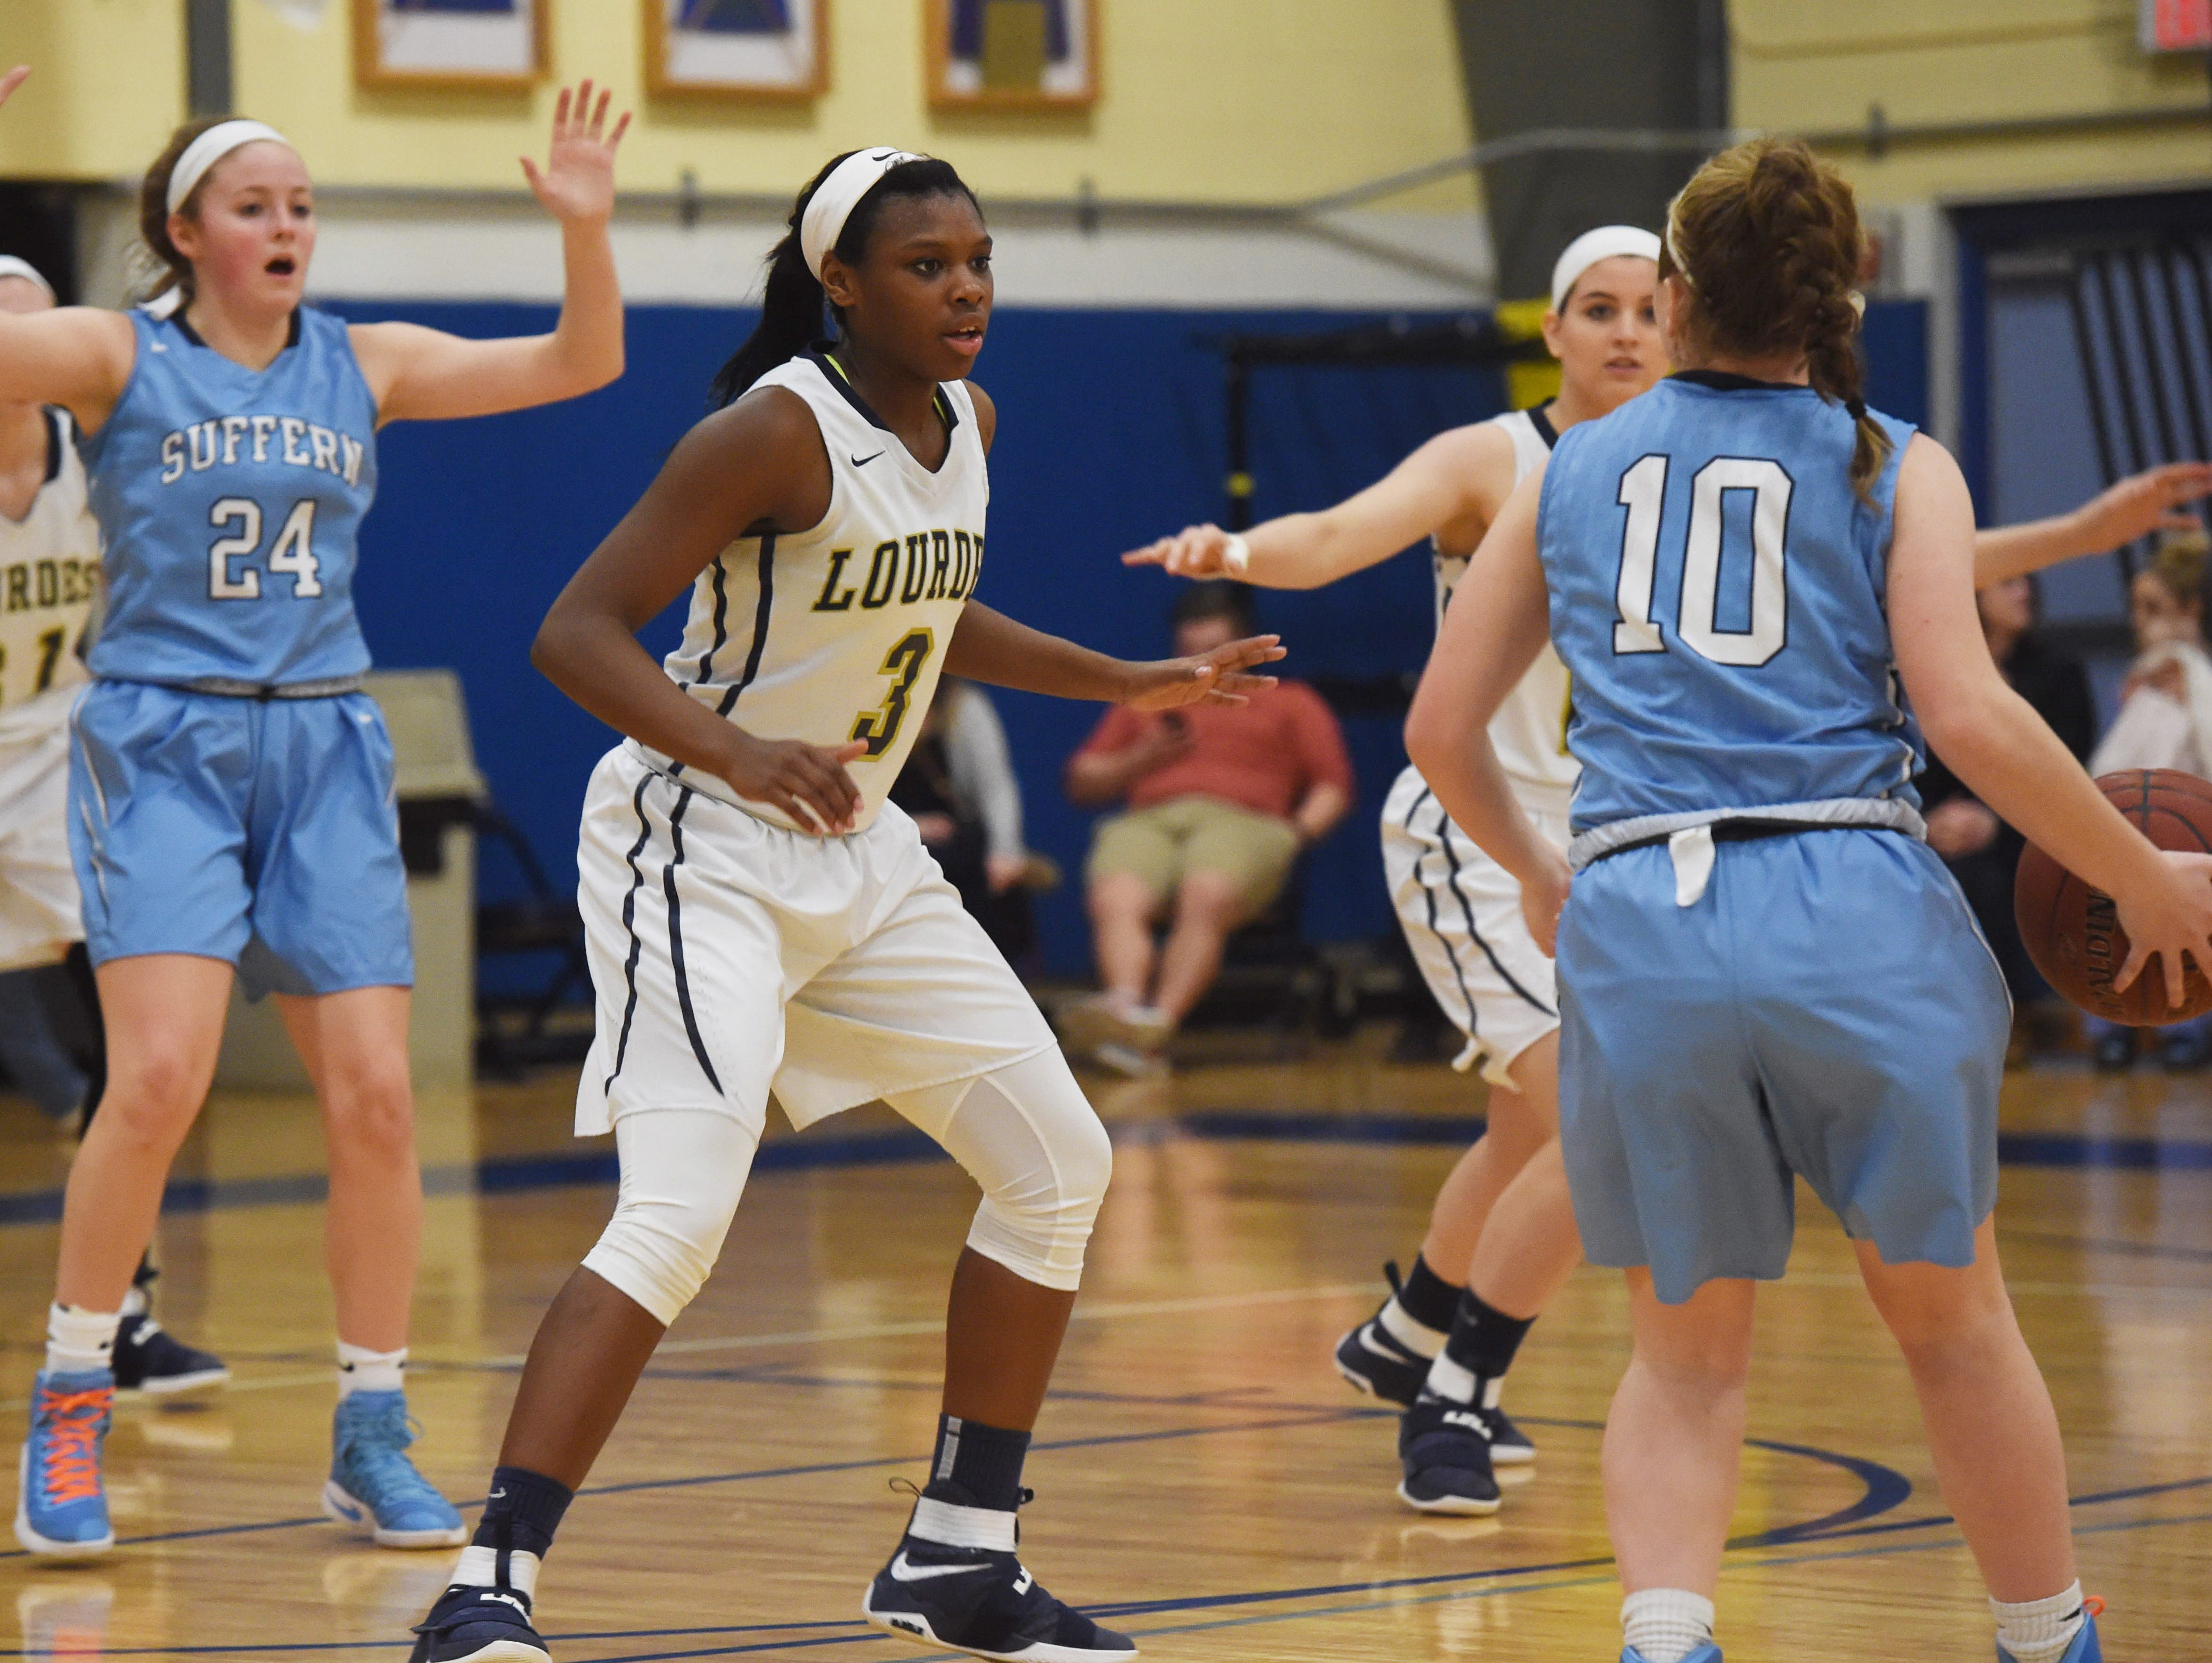 Lourdes' Rebecca Townes, left, defends while Suffern's Grace Krebs, right, heads towards the basket during Friday's game.